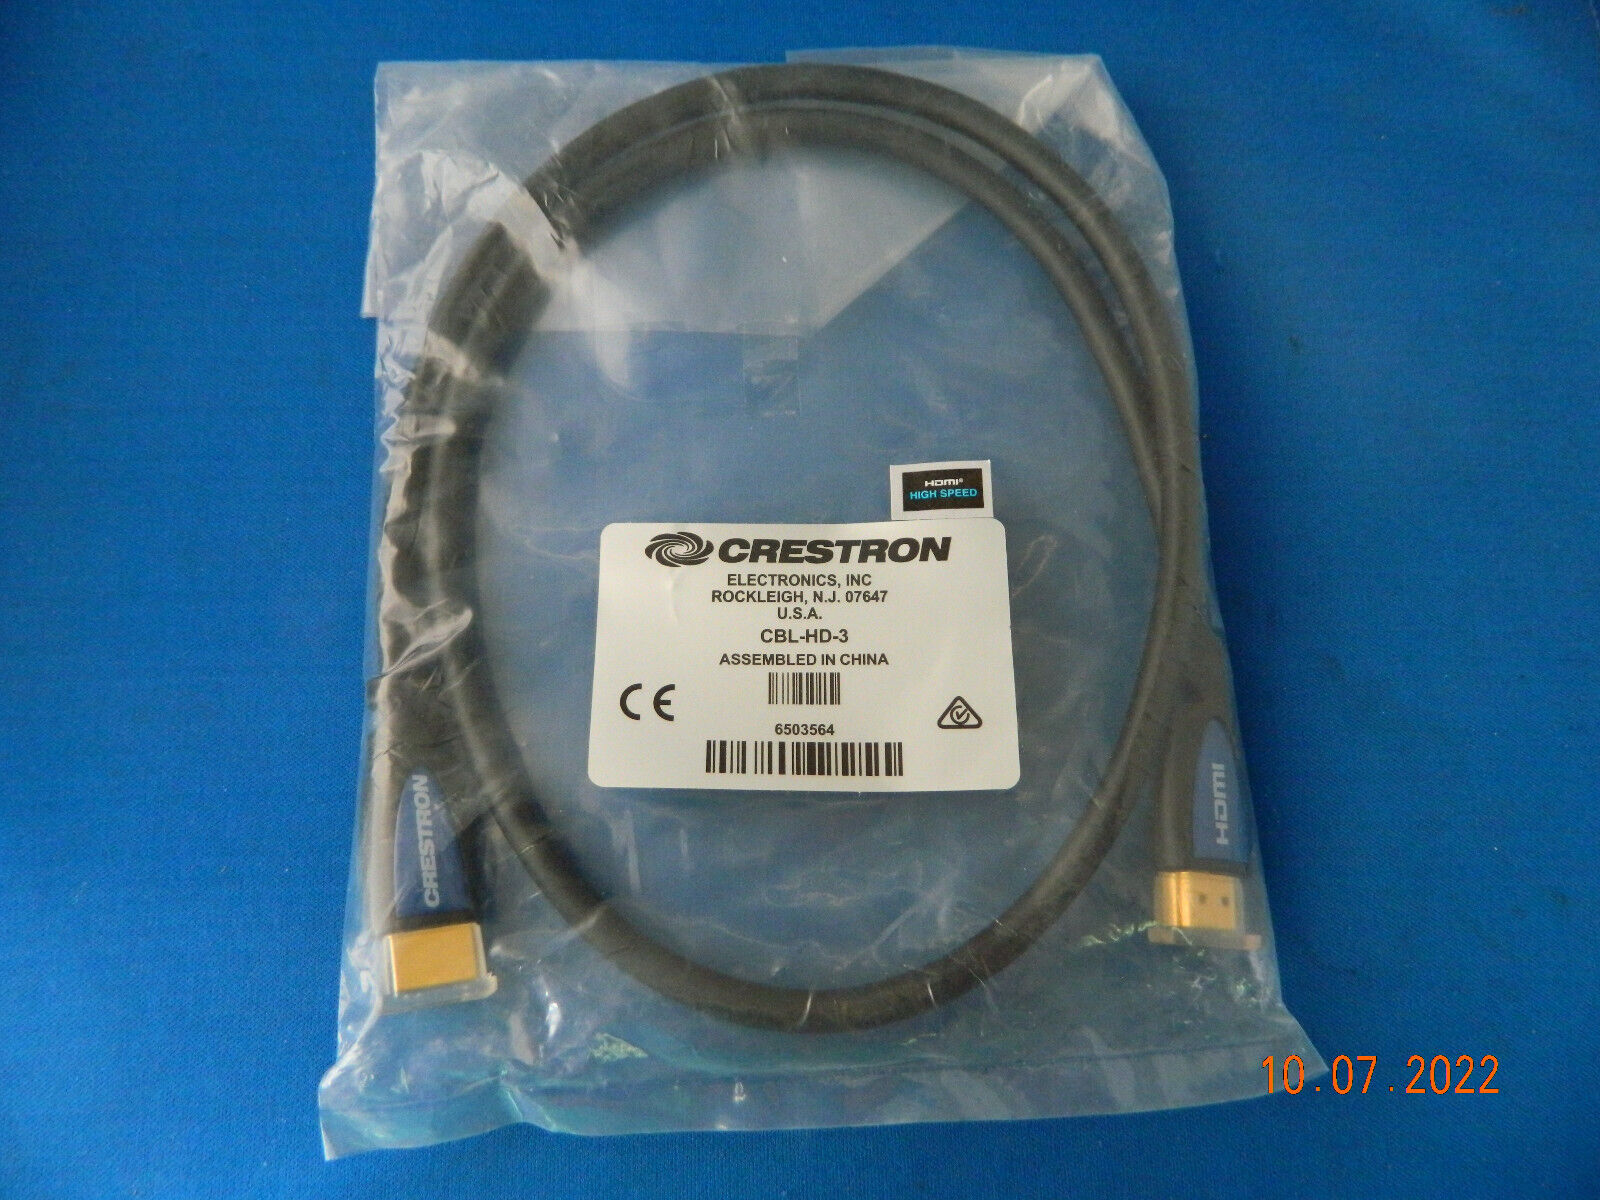 Crestron Certified CBL-HD-3 HDMI® Interface Cable,18 Gbps, 3 ft (1.8 m) 6503564